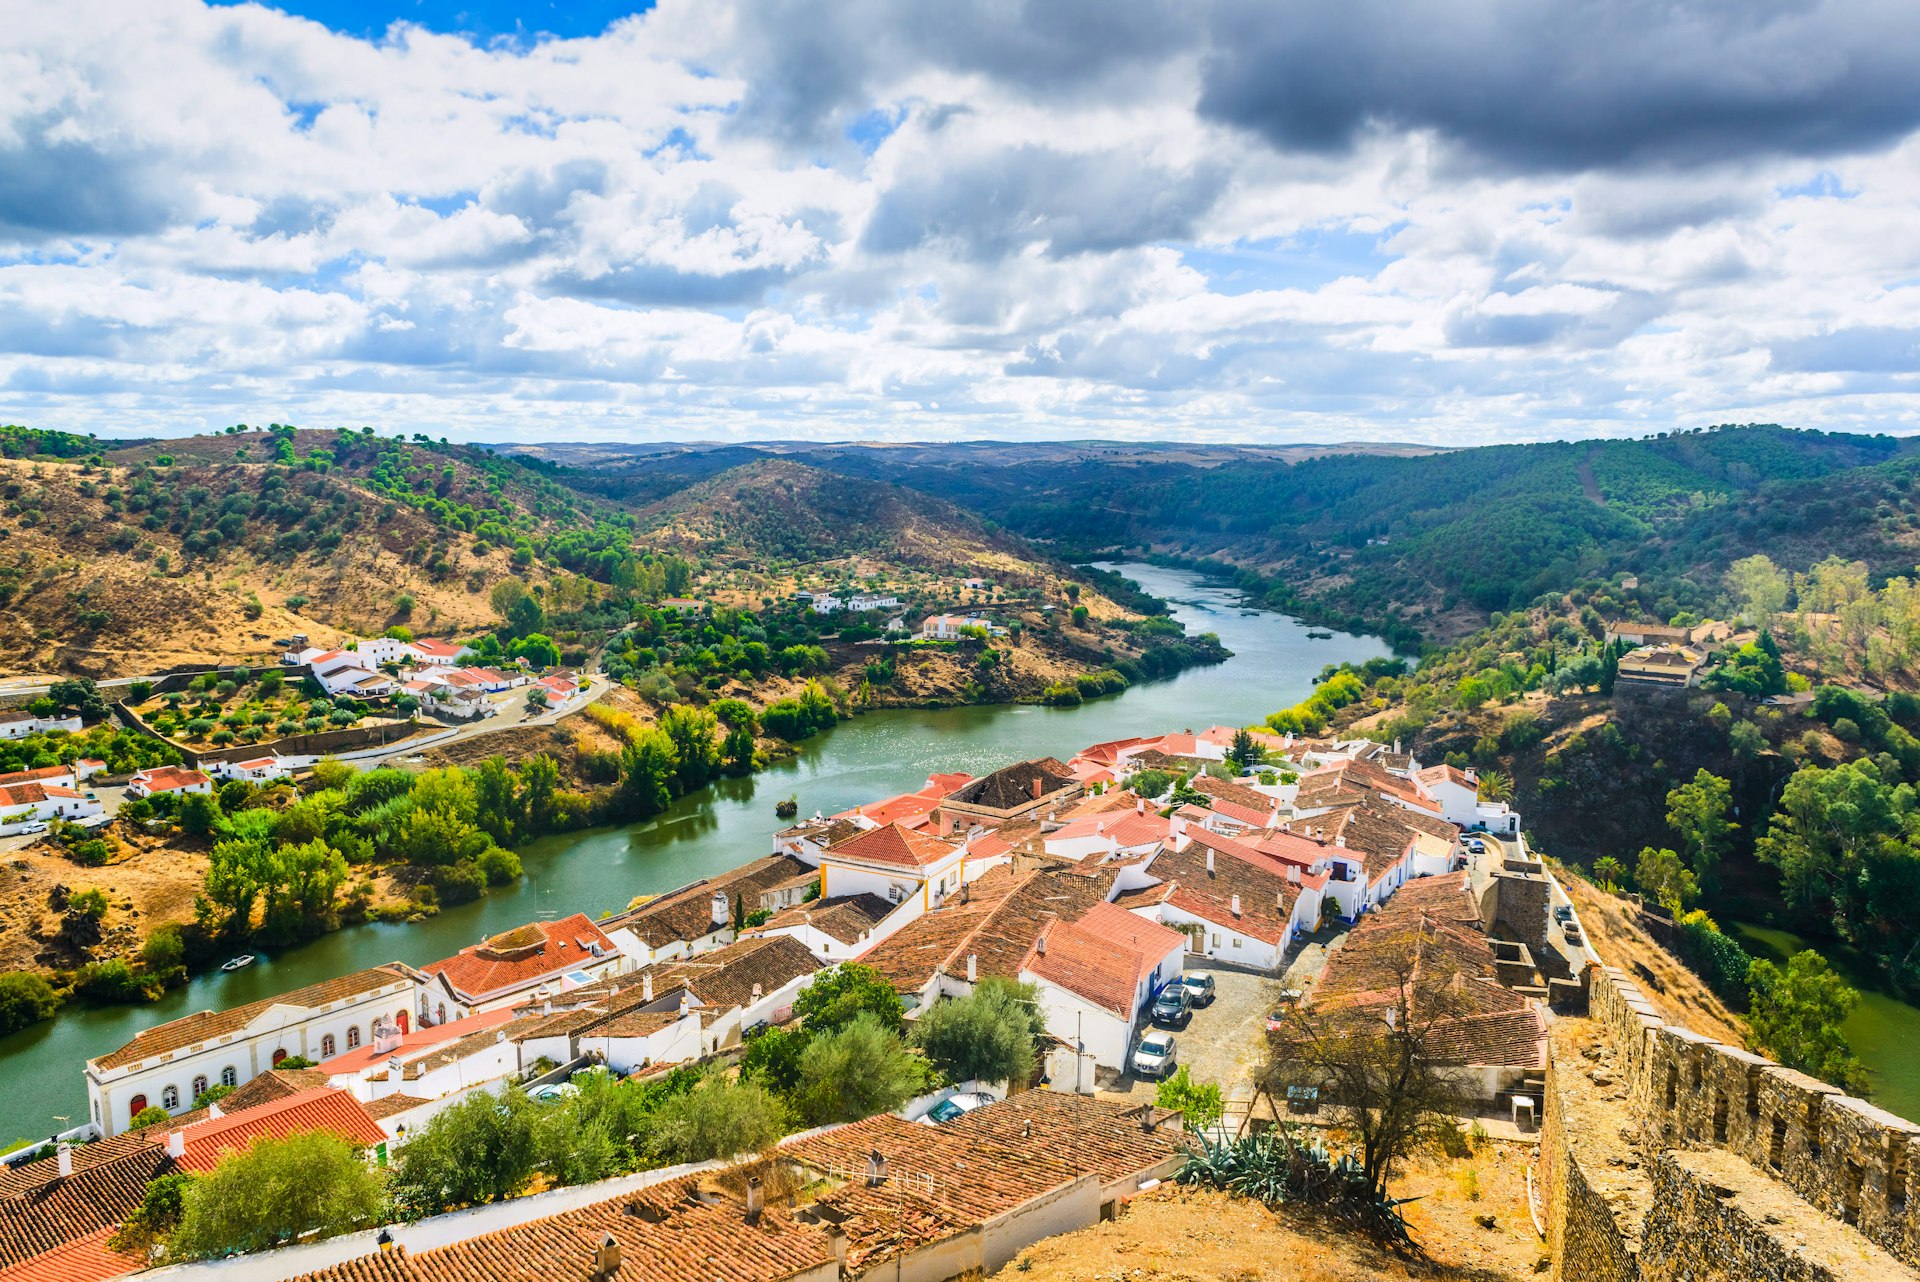 View of the River Guadiana and the village of Mertola, Portugal